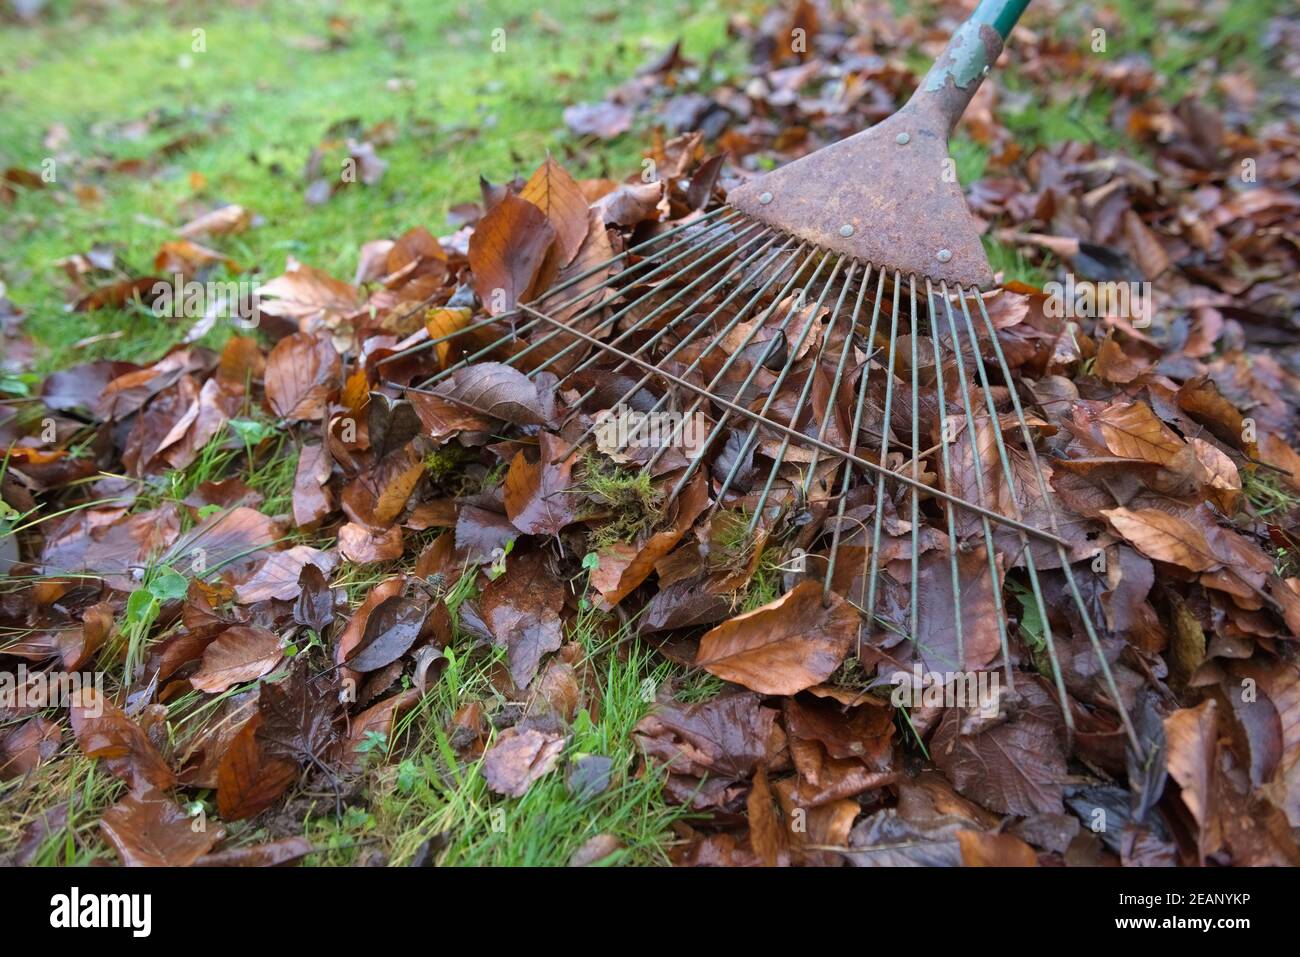 Moss pokes out from the prongs of a rake as it used to sweep leaves. Stock Photo